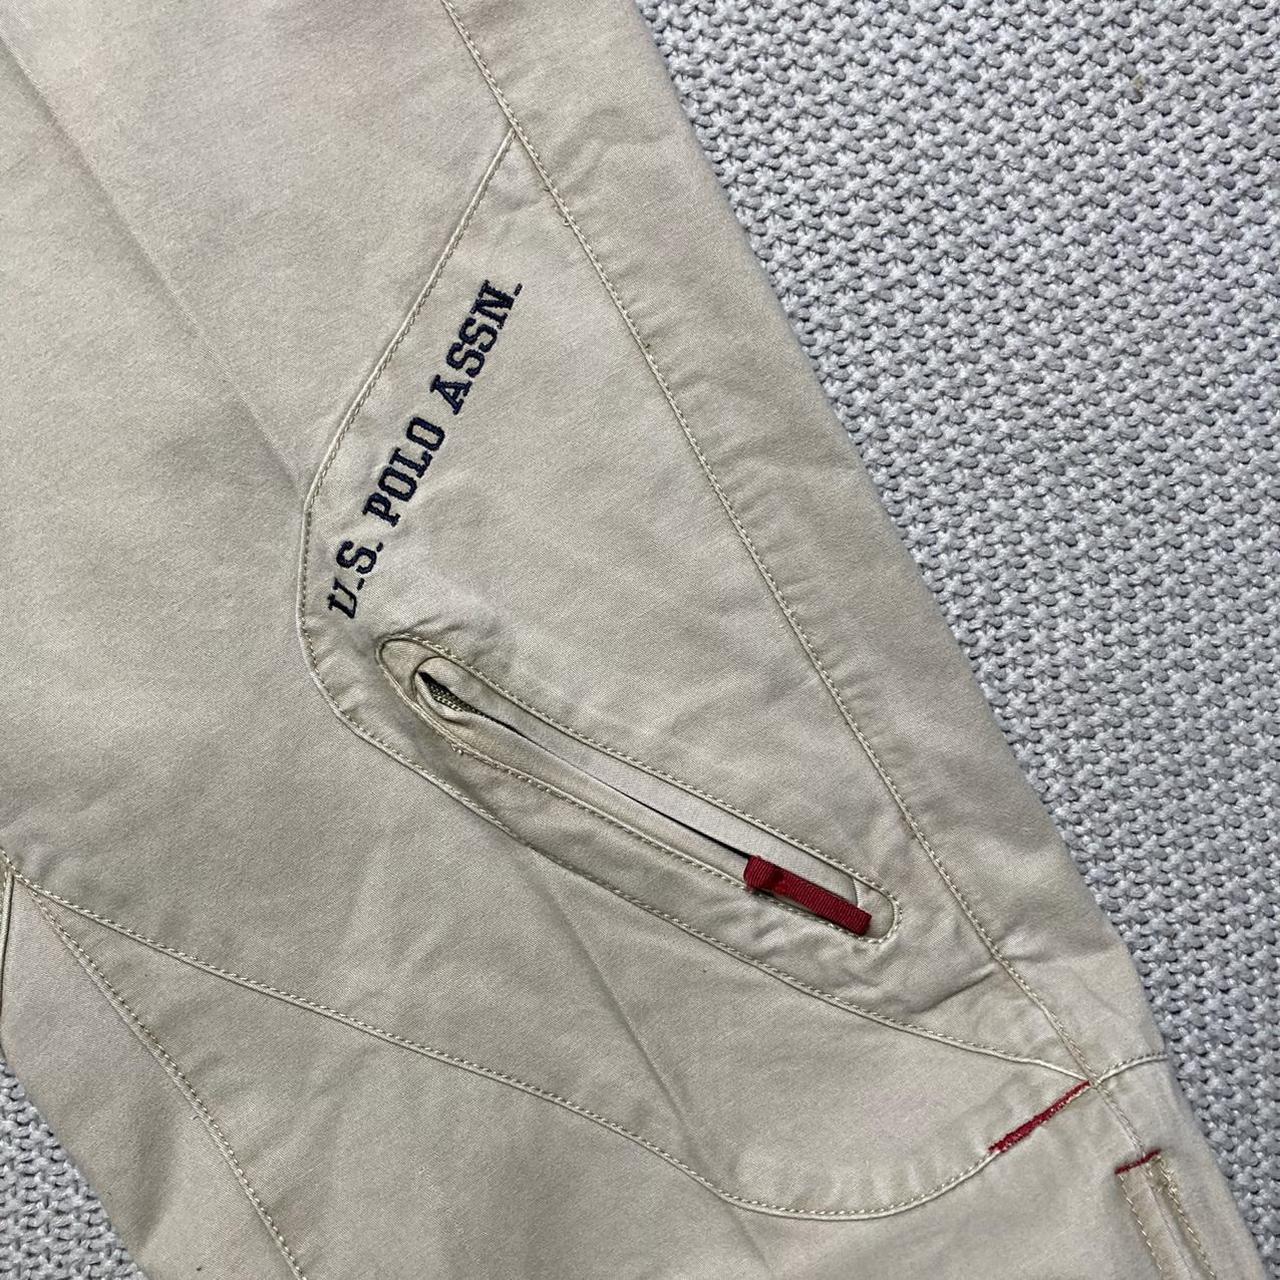 US Polo Assn. side snap track pants No size tag - - Depop